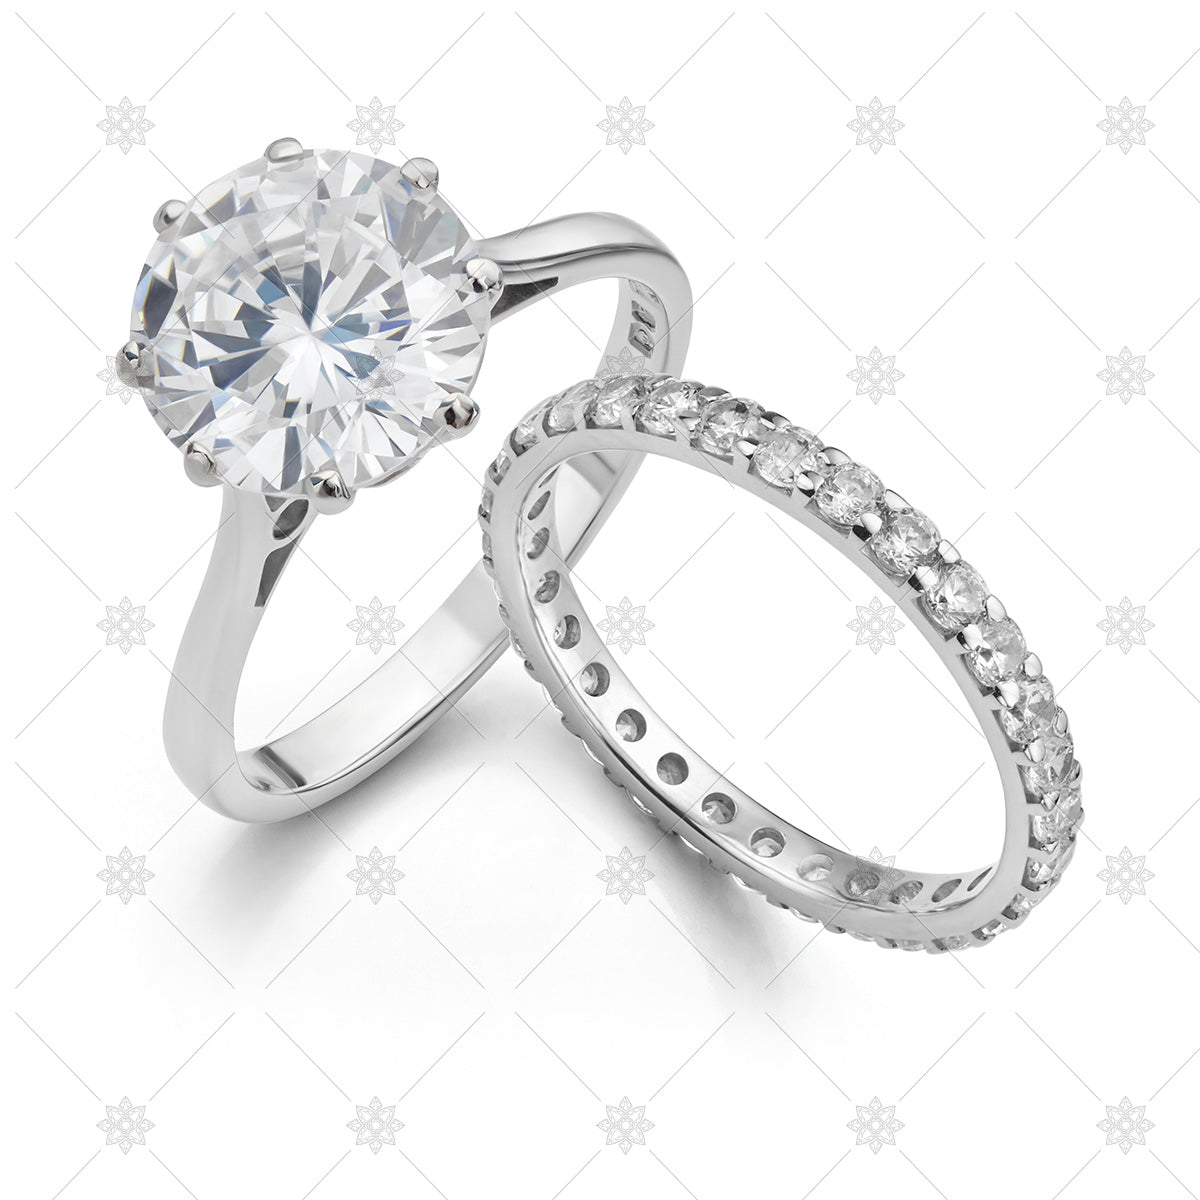 Solitaire Engagement Ring and Wedding Ring - JG5120 – JEWELLERY GRAPHICS